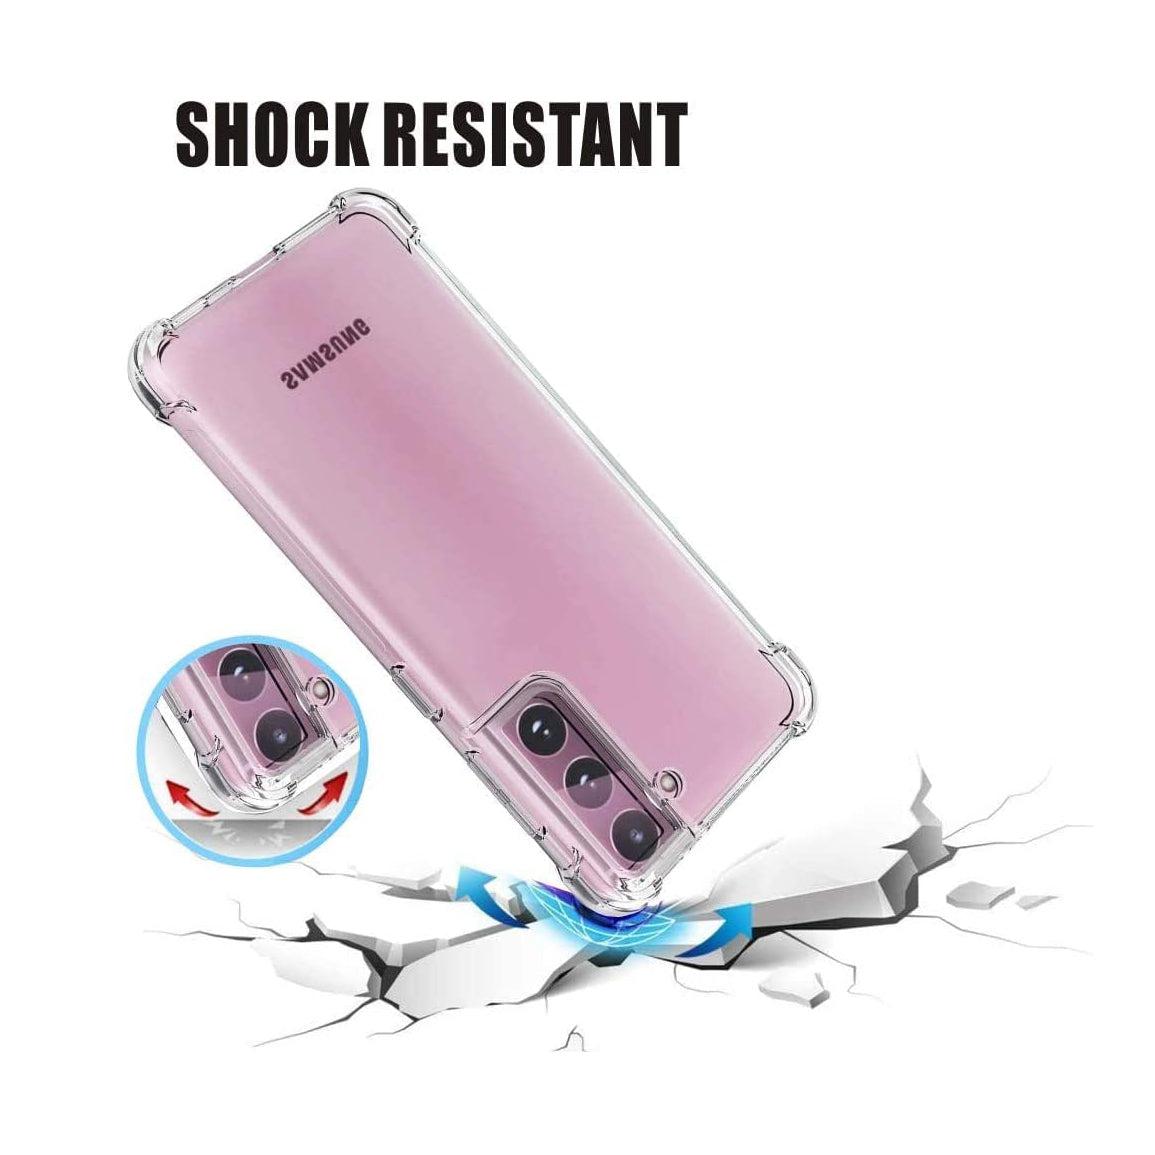 For Samsung Galaxy S22 Case Cover Clear ShockProof Soft TPU Silicone-Samsung Cases & Covers-First Help Tech